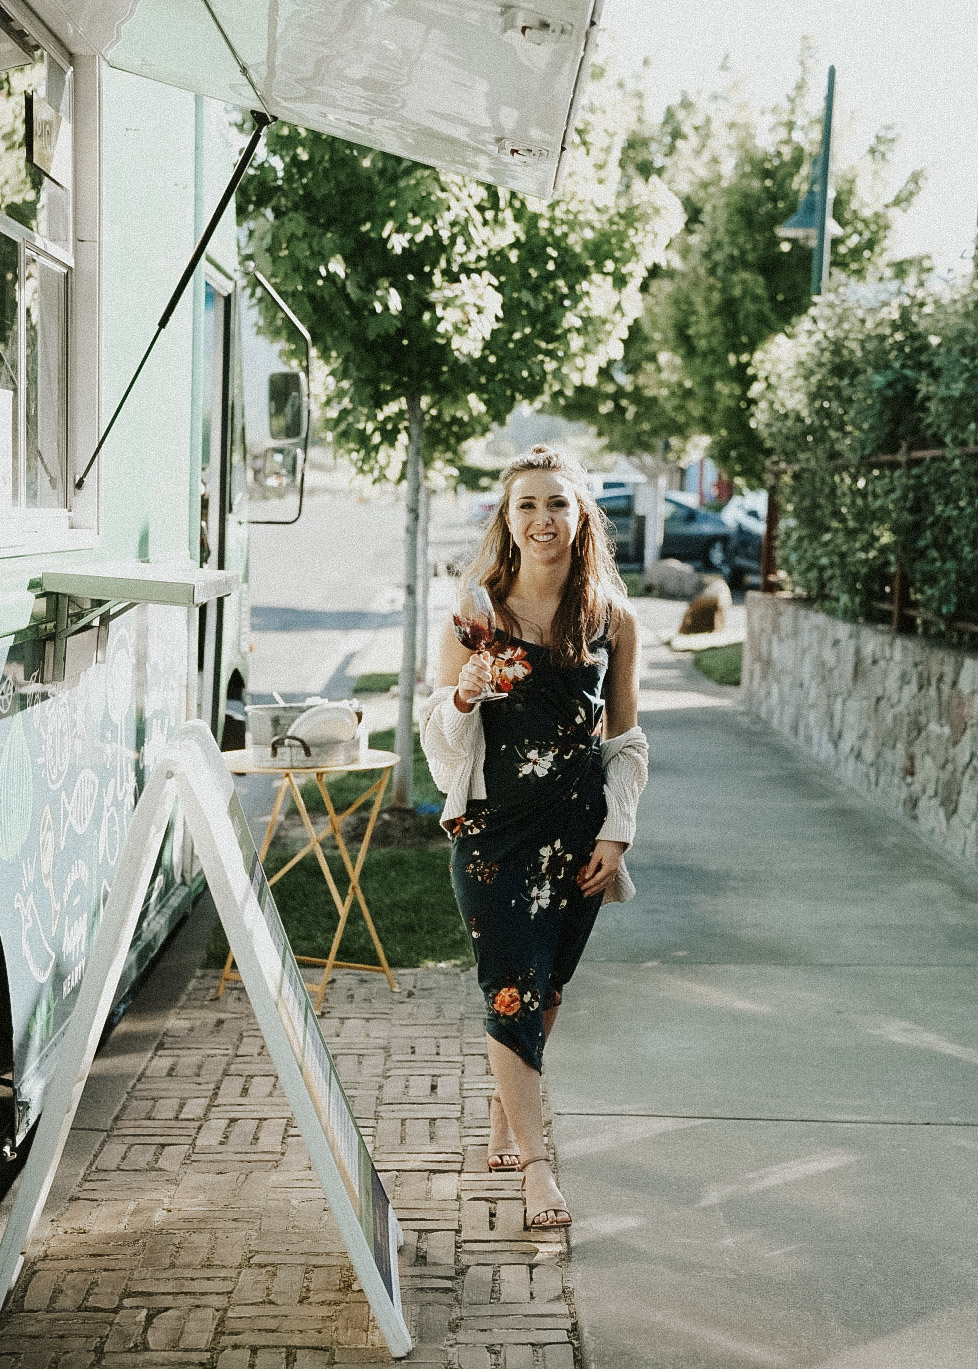 Paige next to the food truck at Clif Family winery holding a glass of wine